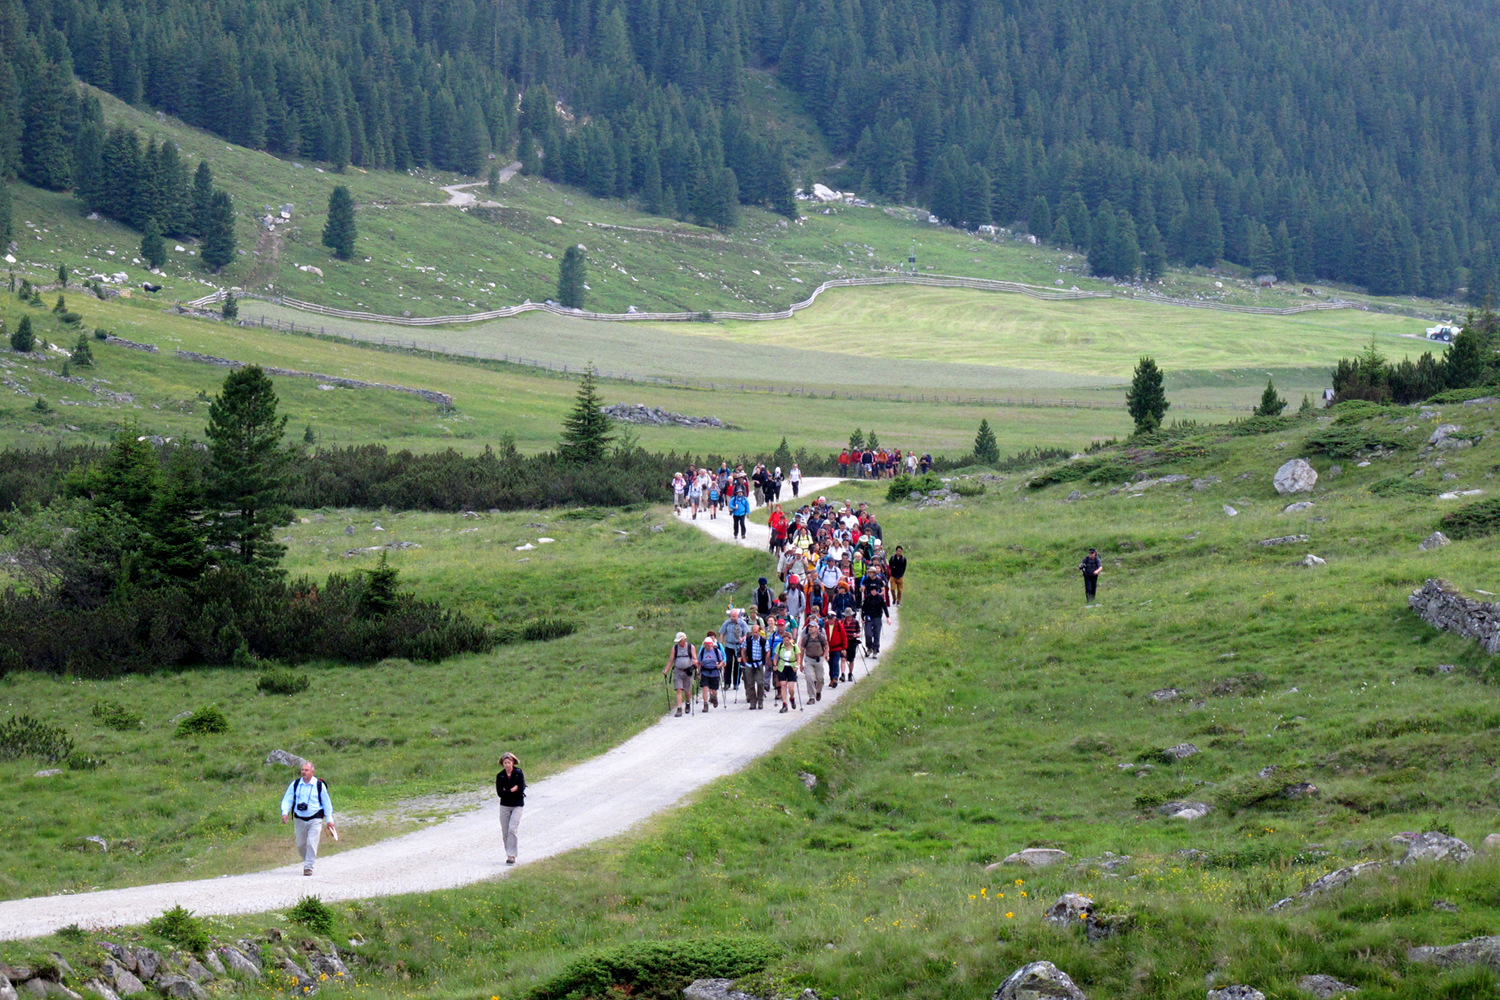 The whole Alpice Peace Crossing group (~170 people) hiking through the Krimmler Achetal valley.